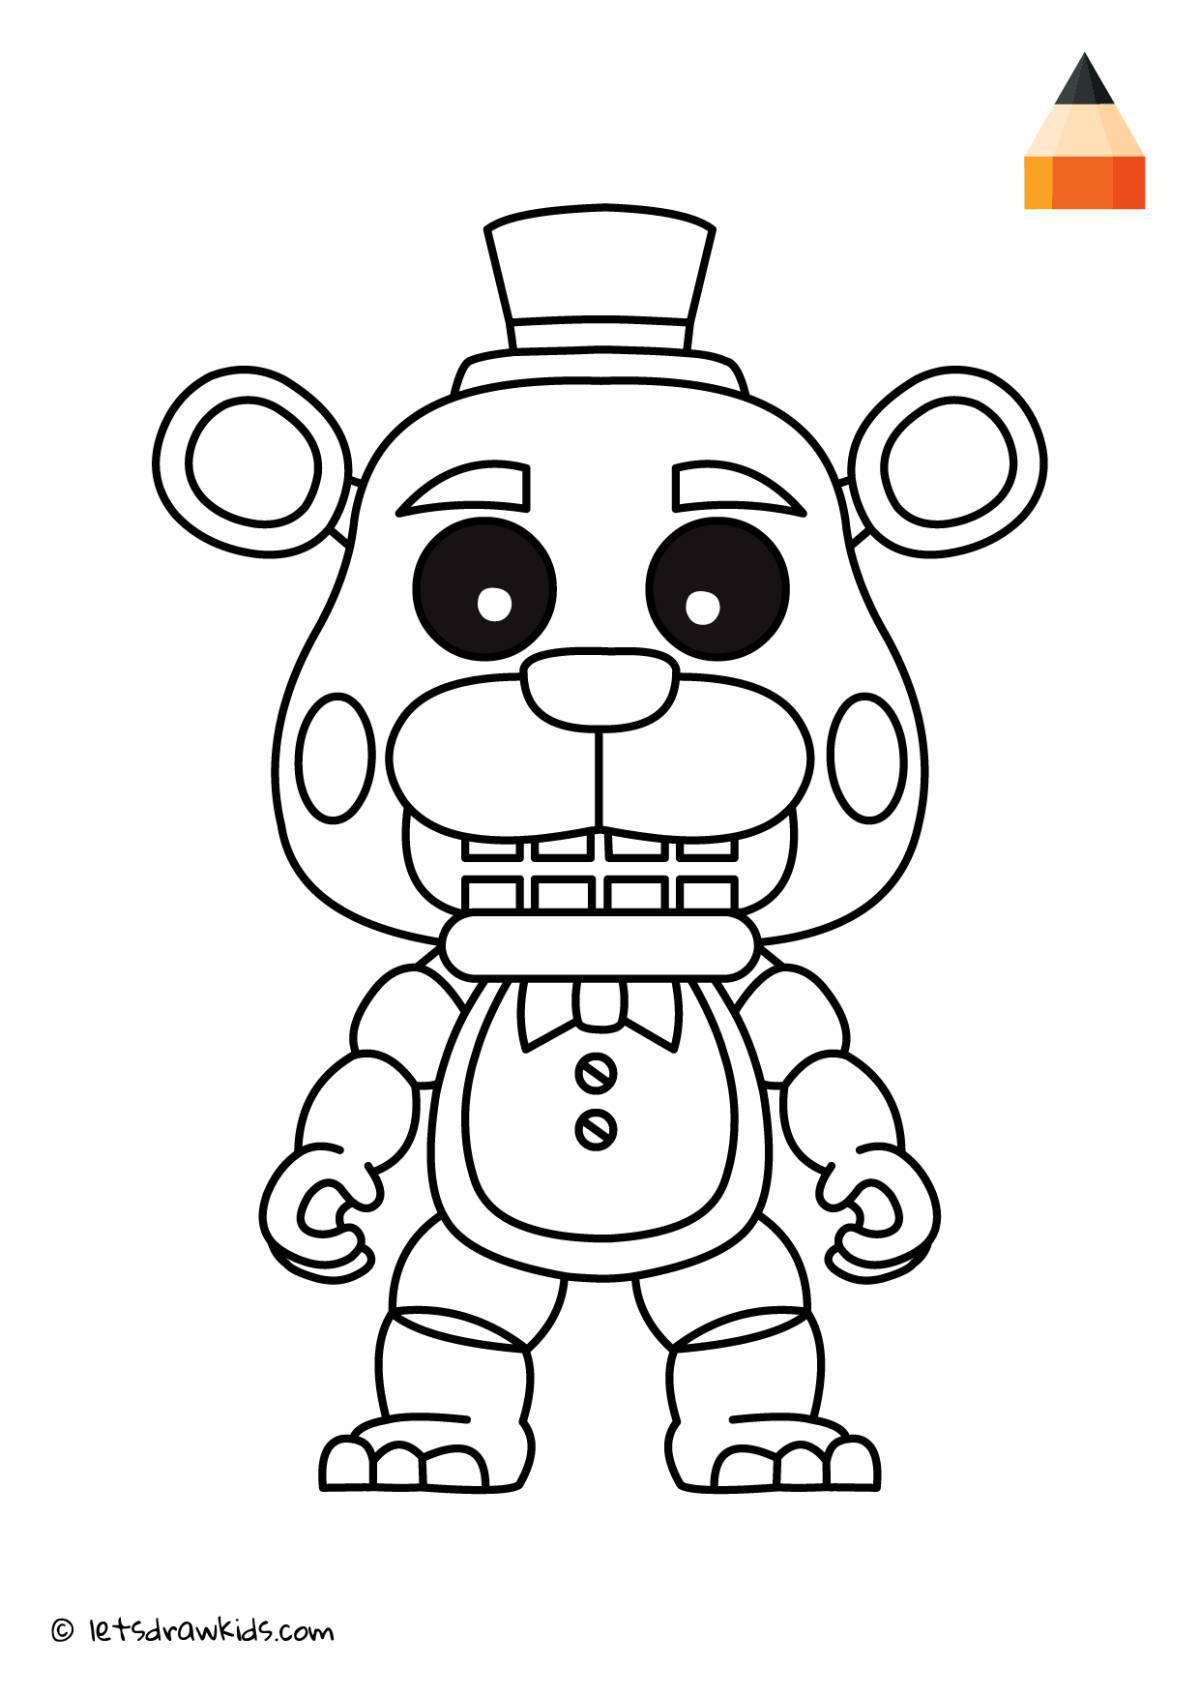 Colourful animatronics coloring book for kids